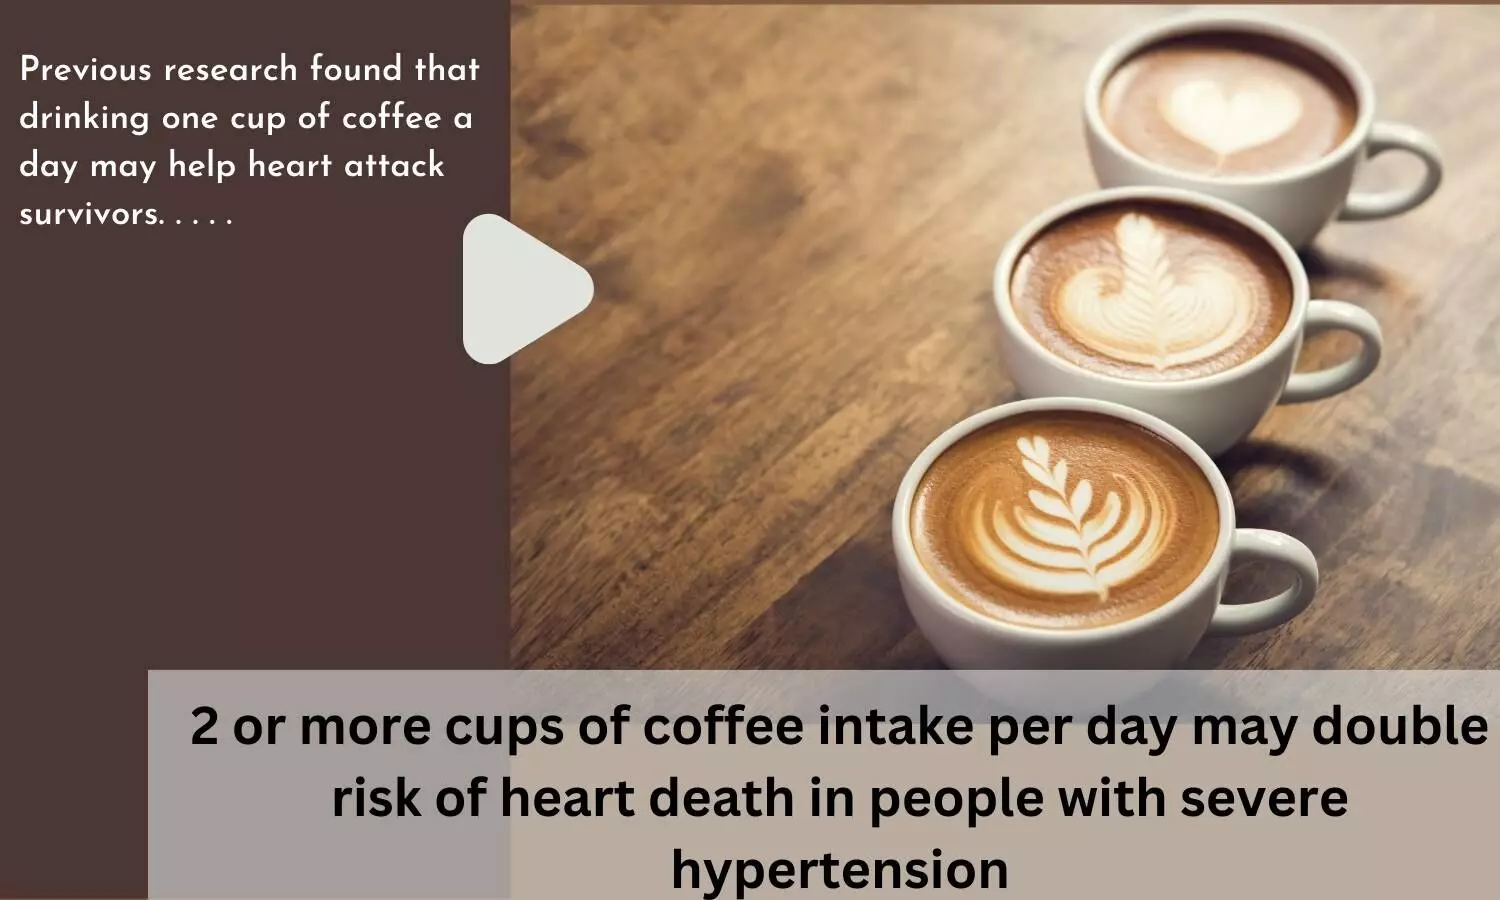 2 or more cups of coffee intake per day may double risk of heart death in people with severe hypertension